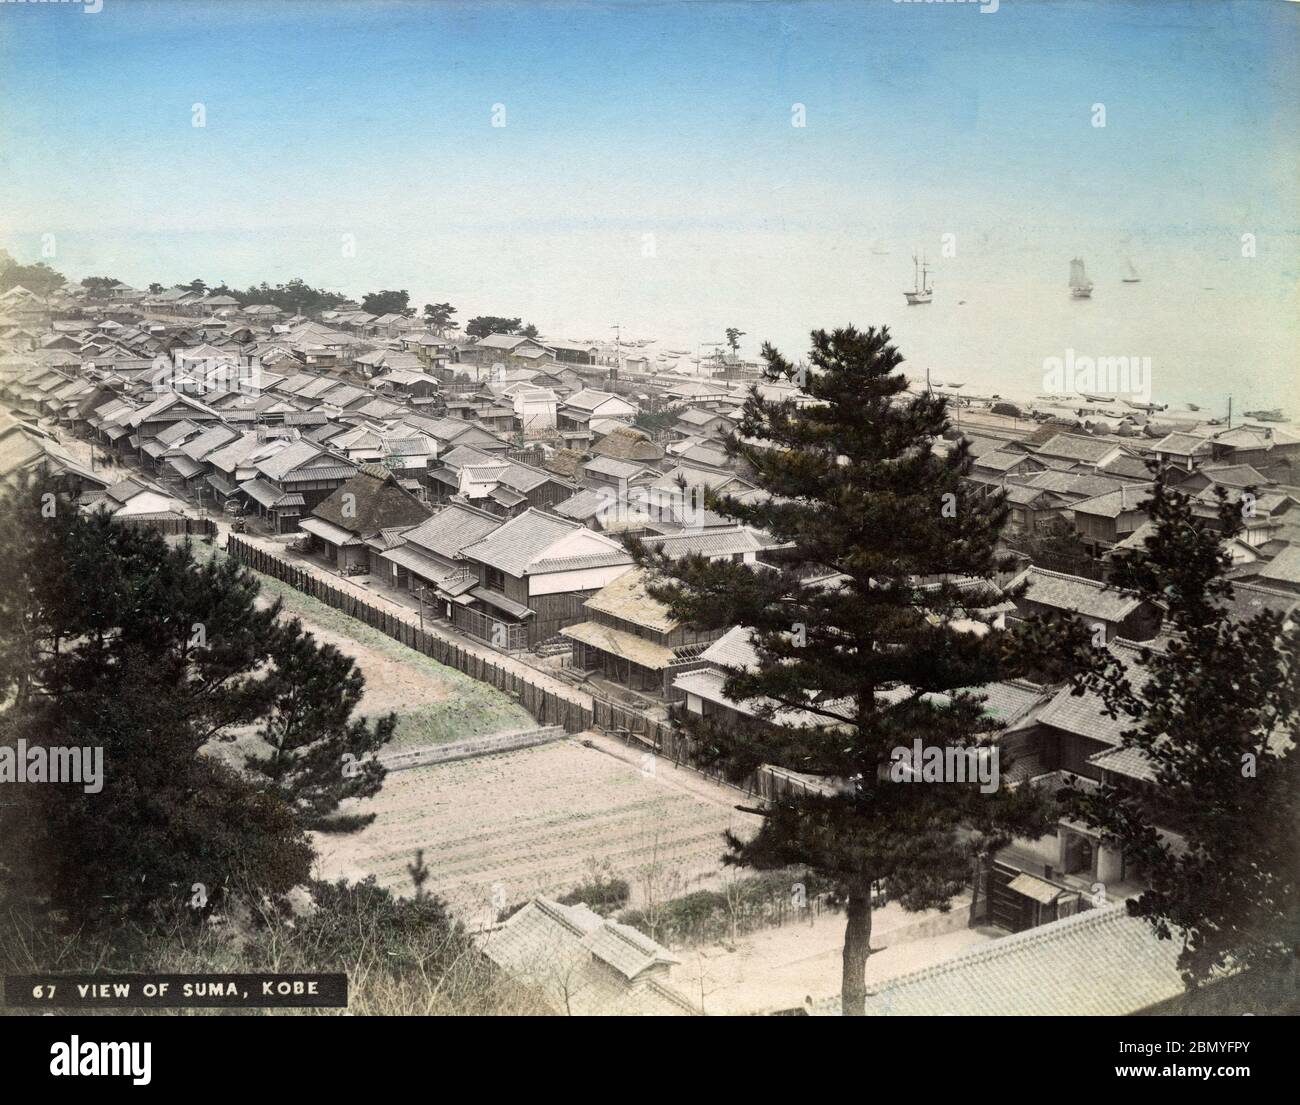 [ 1890s Japan - Suma, near Kobe ] —   Very rare panoramic view of Suma, near Kobe in Hyogo Prefecture.  Suma has regularly appeared in classic works of Japanese literature like the Genji monogatari, Heike monogatari and Ise monogatari.  American rock band the Beach Boys released a song about Suma's famous white beach, called Sumahama, in 1979 (Showa 54).  19th century vintage albumen photograph. Stock Photo